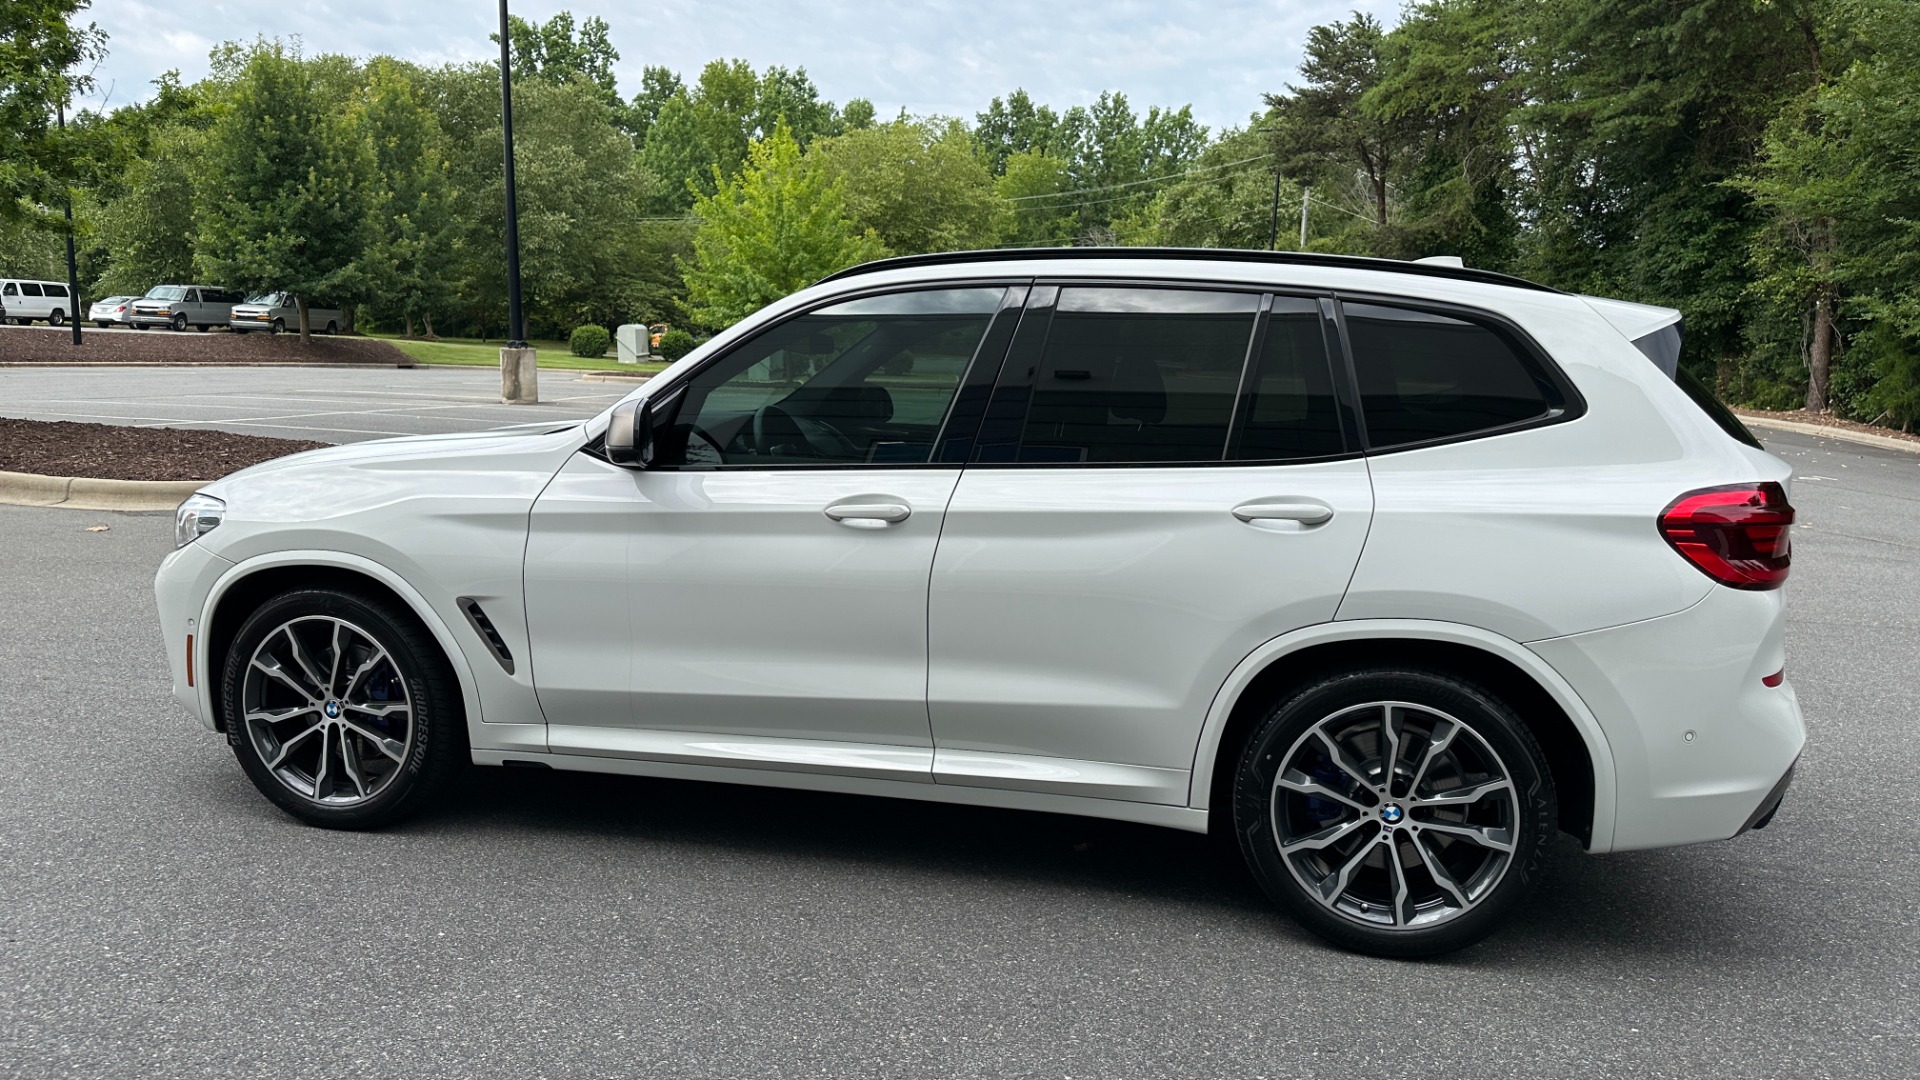 Used 2020 BMW X3 M40i / DRIVER ASSIST / EXECUTIVE PACKAGE / HK SOUND / AMBIENT LIGHT for sale $40,995 at Formula Imports in Charlotte NC 28227 6